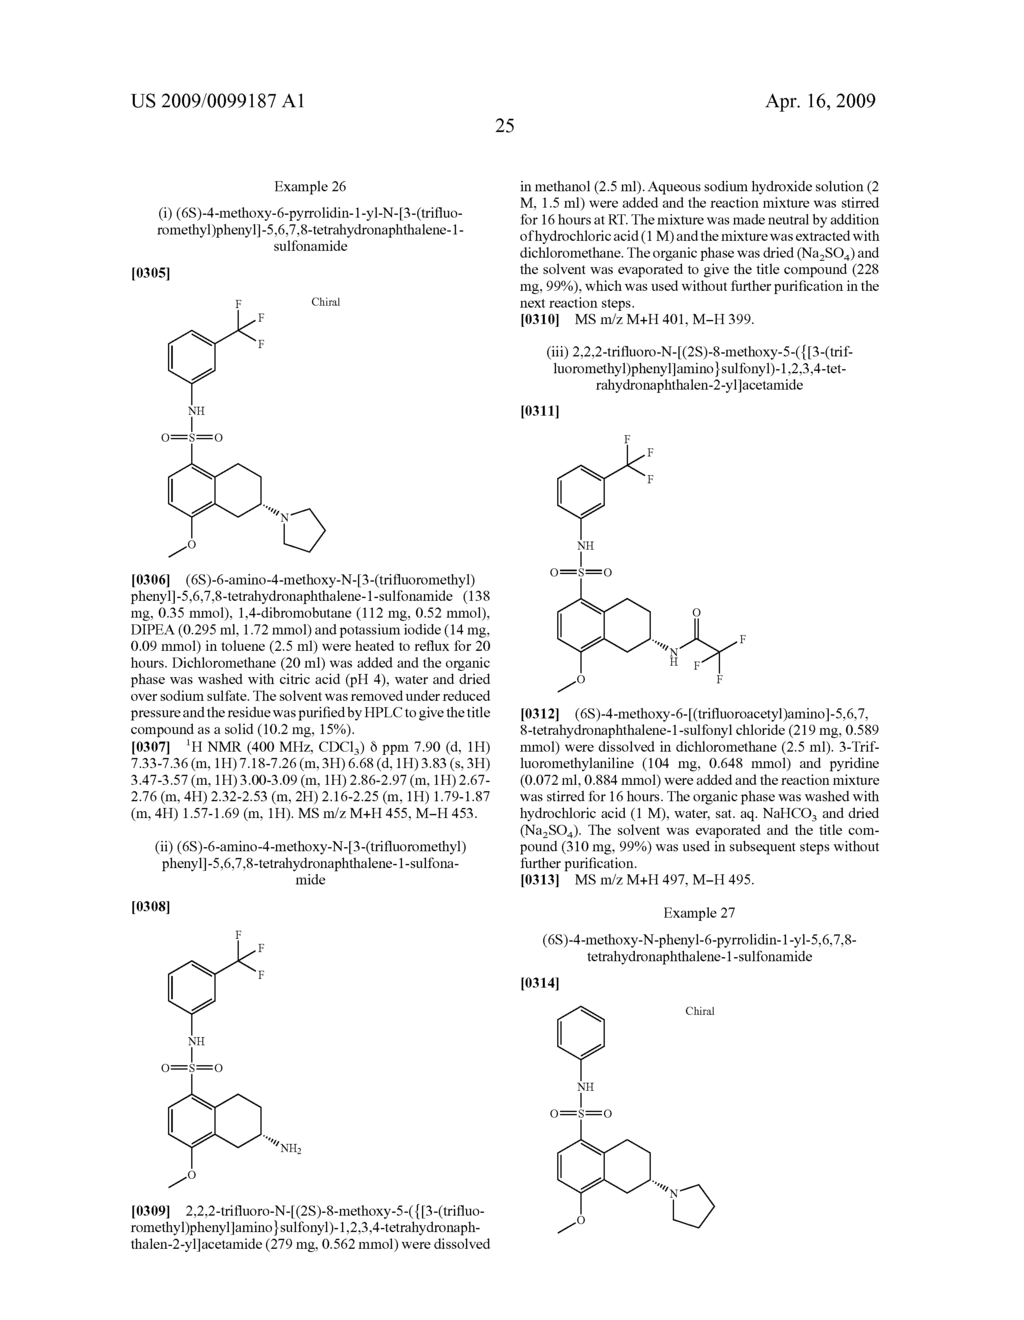 Novel 8-Sulfonyl-3 Aminosubstituted Chroman or Tetrahydronaphtalene Derivatives Modulating the 5HT6 Receptor - diagram, schematic, and image 26